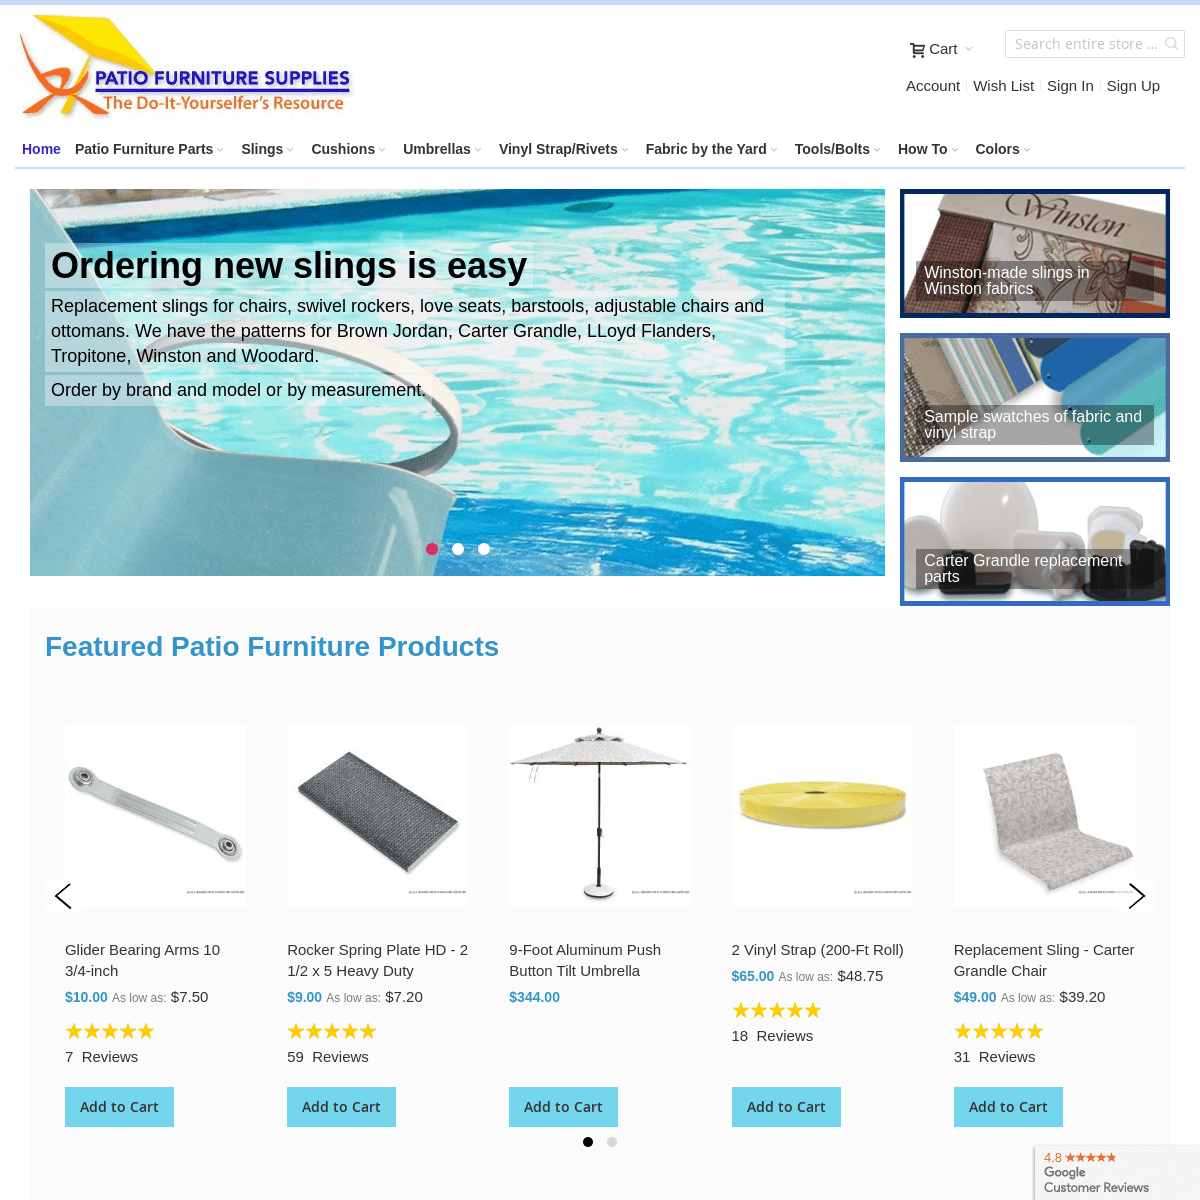 A complete backup of patiofurnituresupplies.com